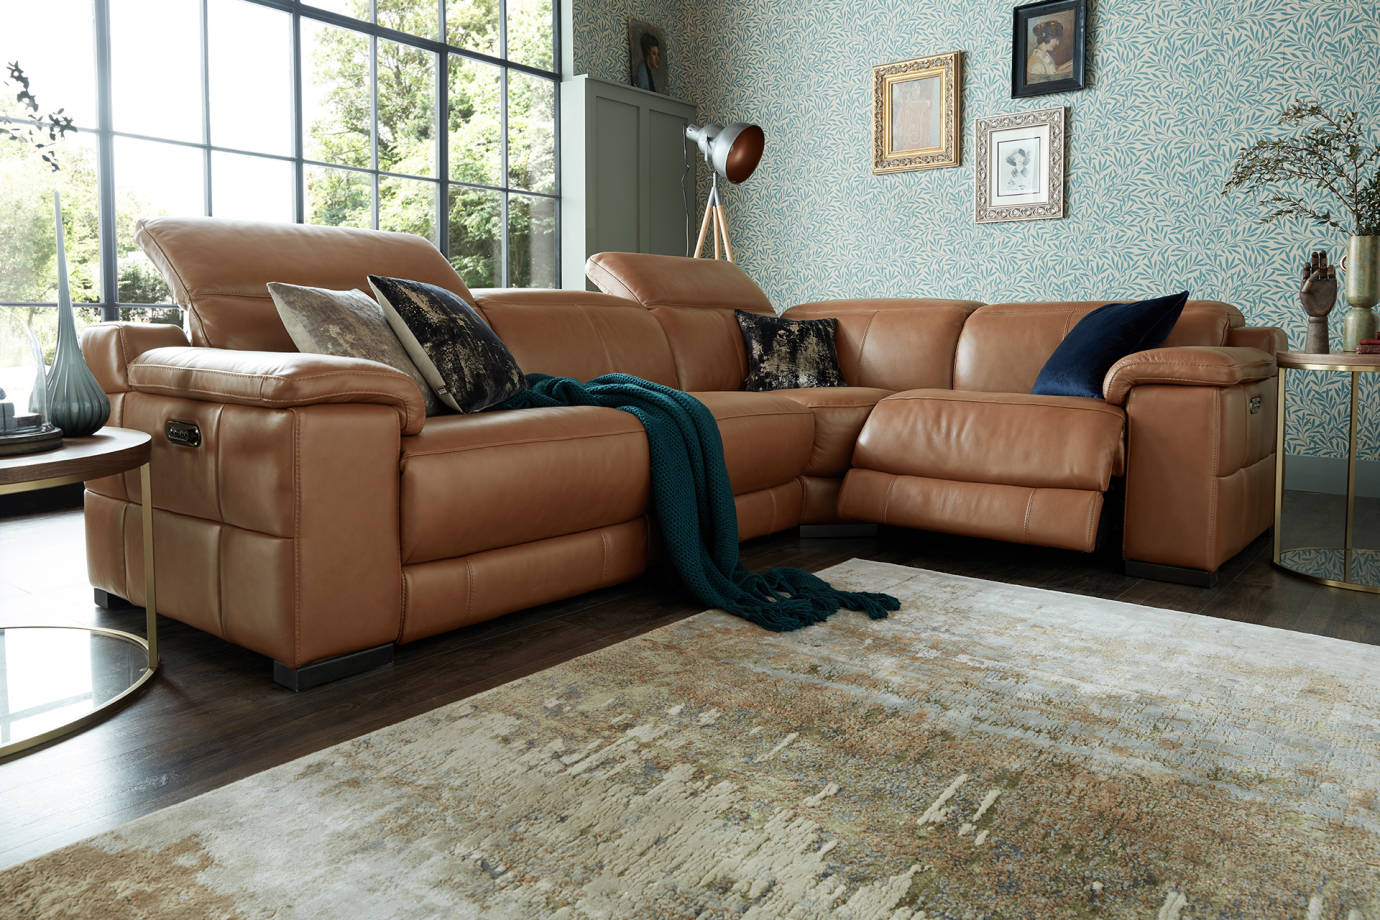 Recliner Sofas Leather Fabric And, Best Reclining Leather Sofa Sets Uk